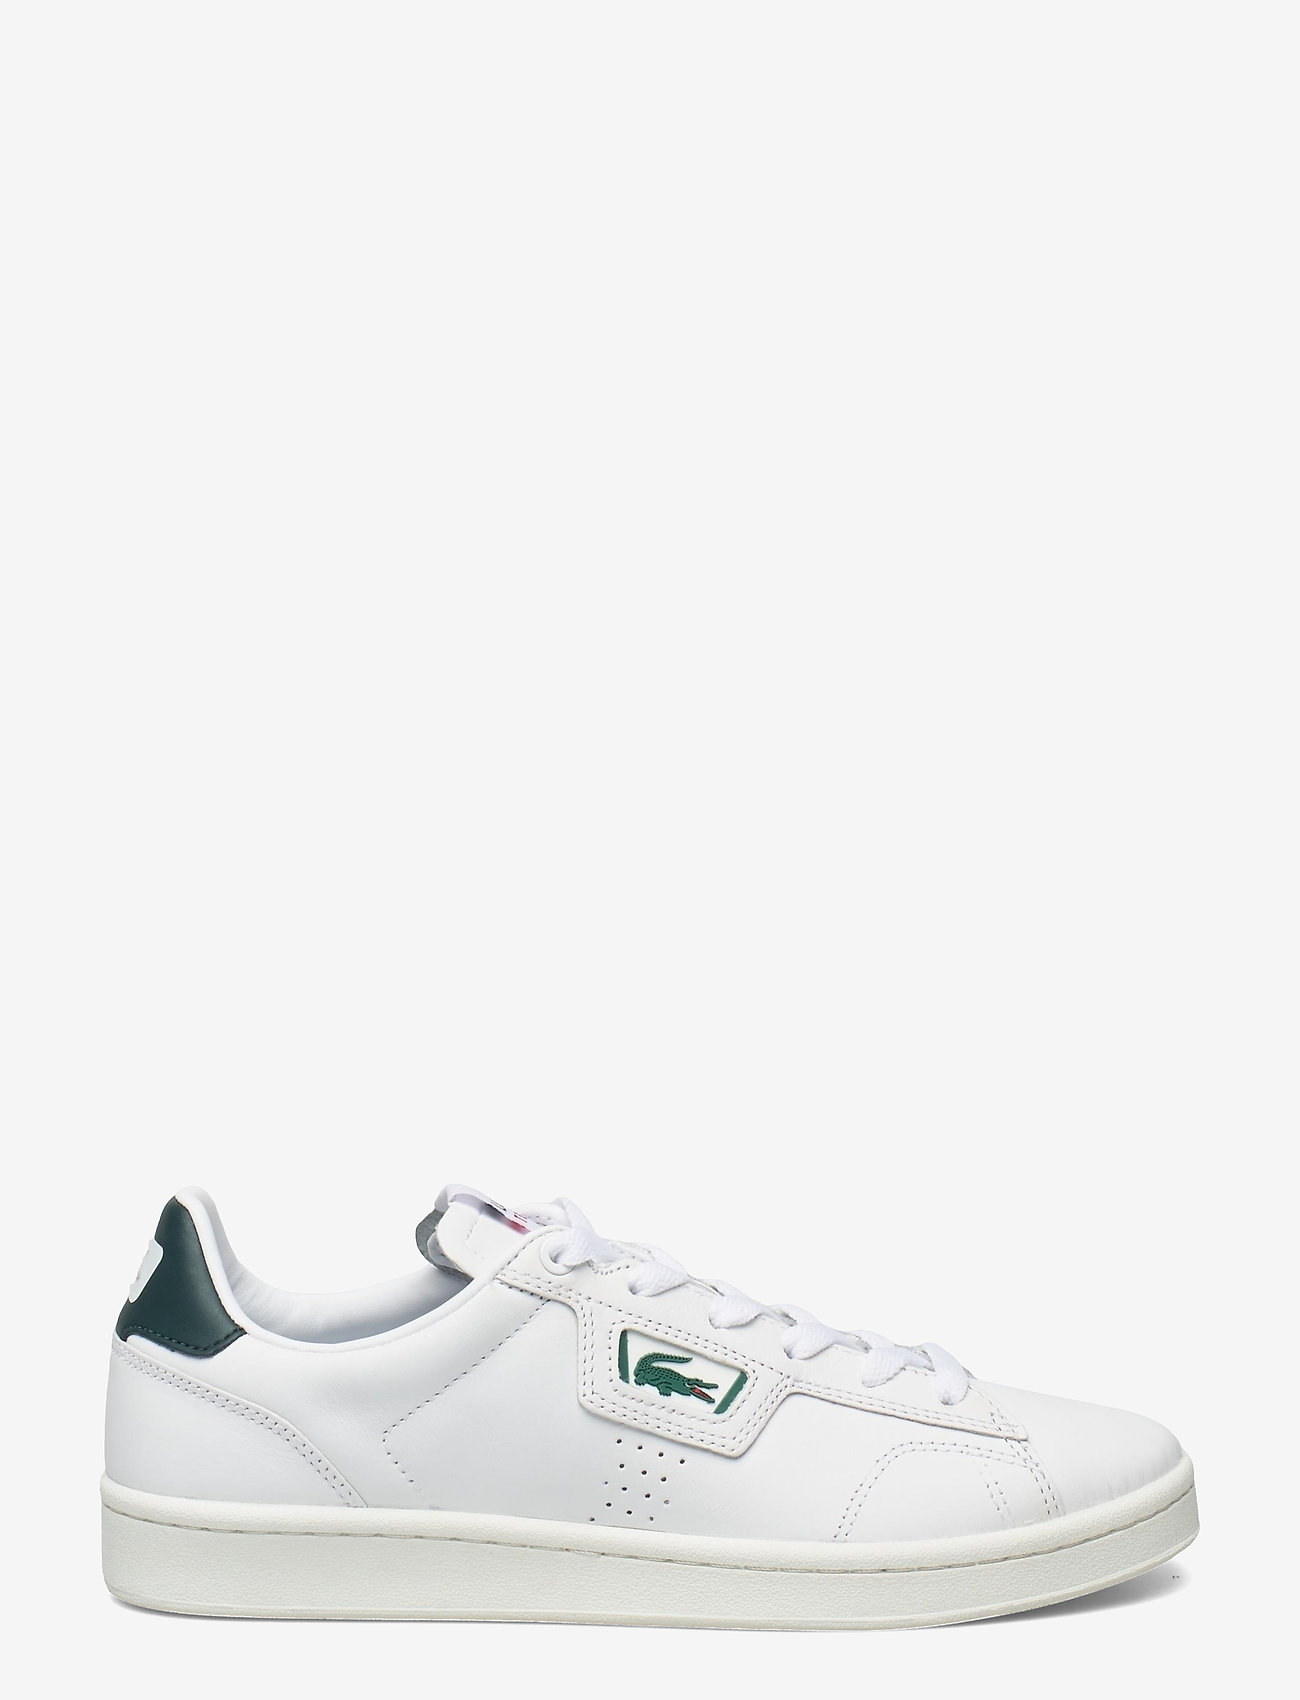 Lacoste Shoes - MASTERS CLAS 07211 - low top sneakers - wht/dk grn - 1